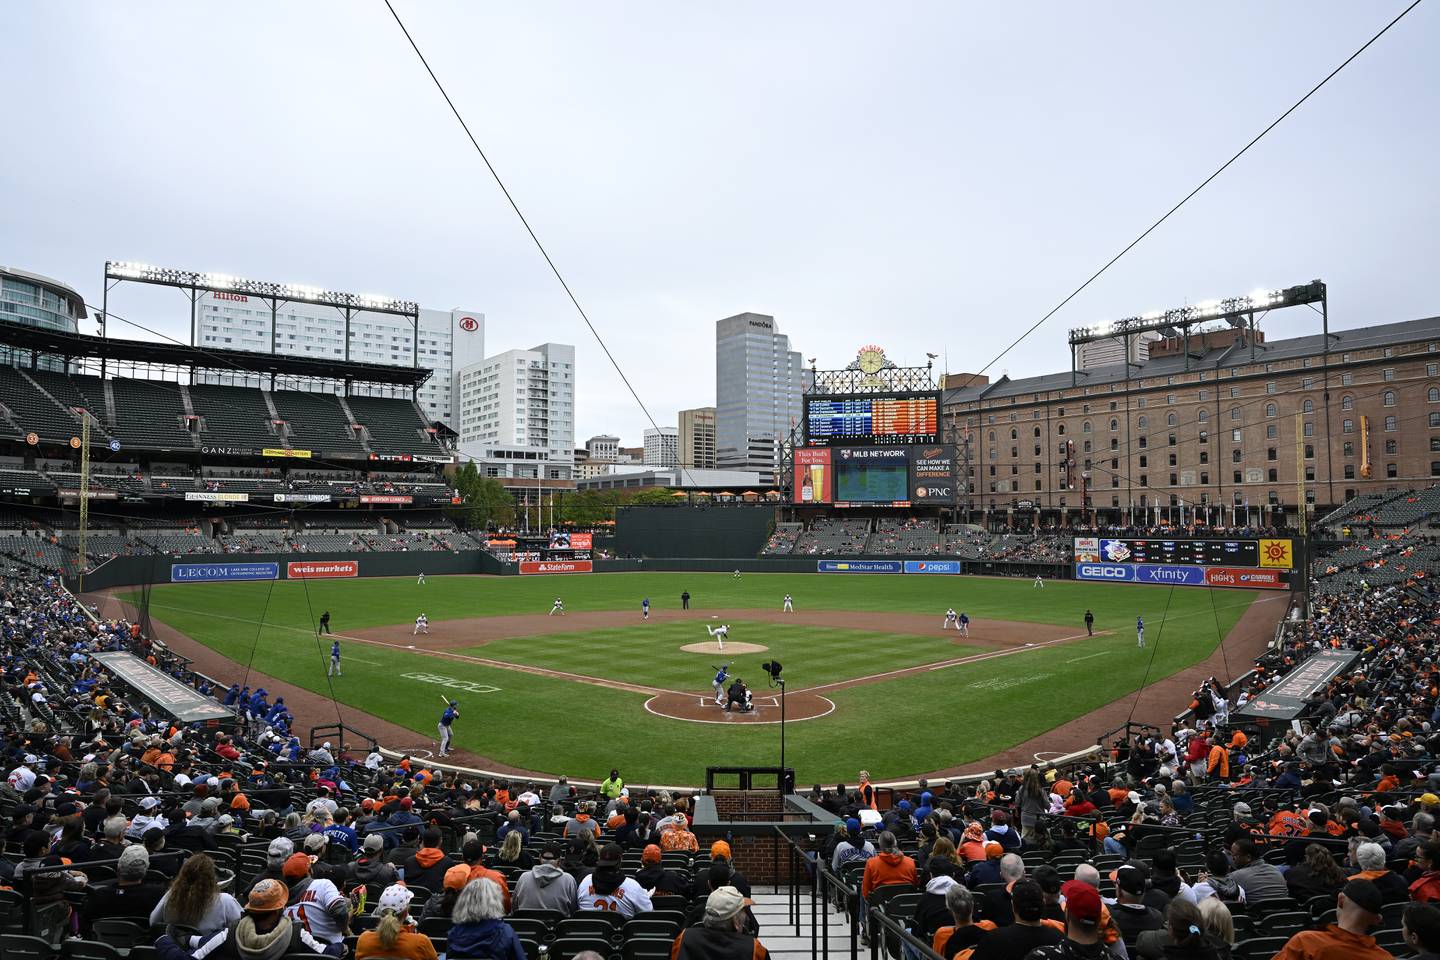 BALTIMORE, MARYLAND - OCTOBER 05: The Baltimore Orioles play the Toronto Blue Jays in the first inning of game two of a doubleheader at Oriole Park at Camden Yards on October 05, 2022 in Baltimore, Maryland.